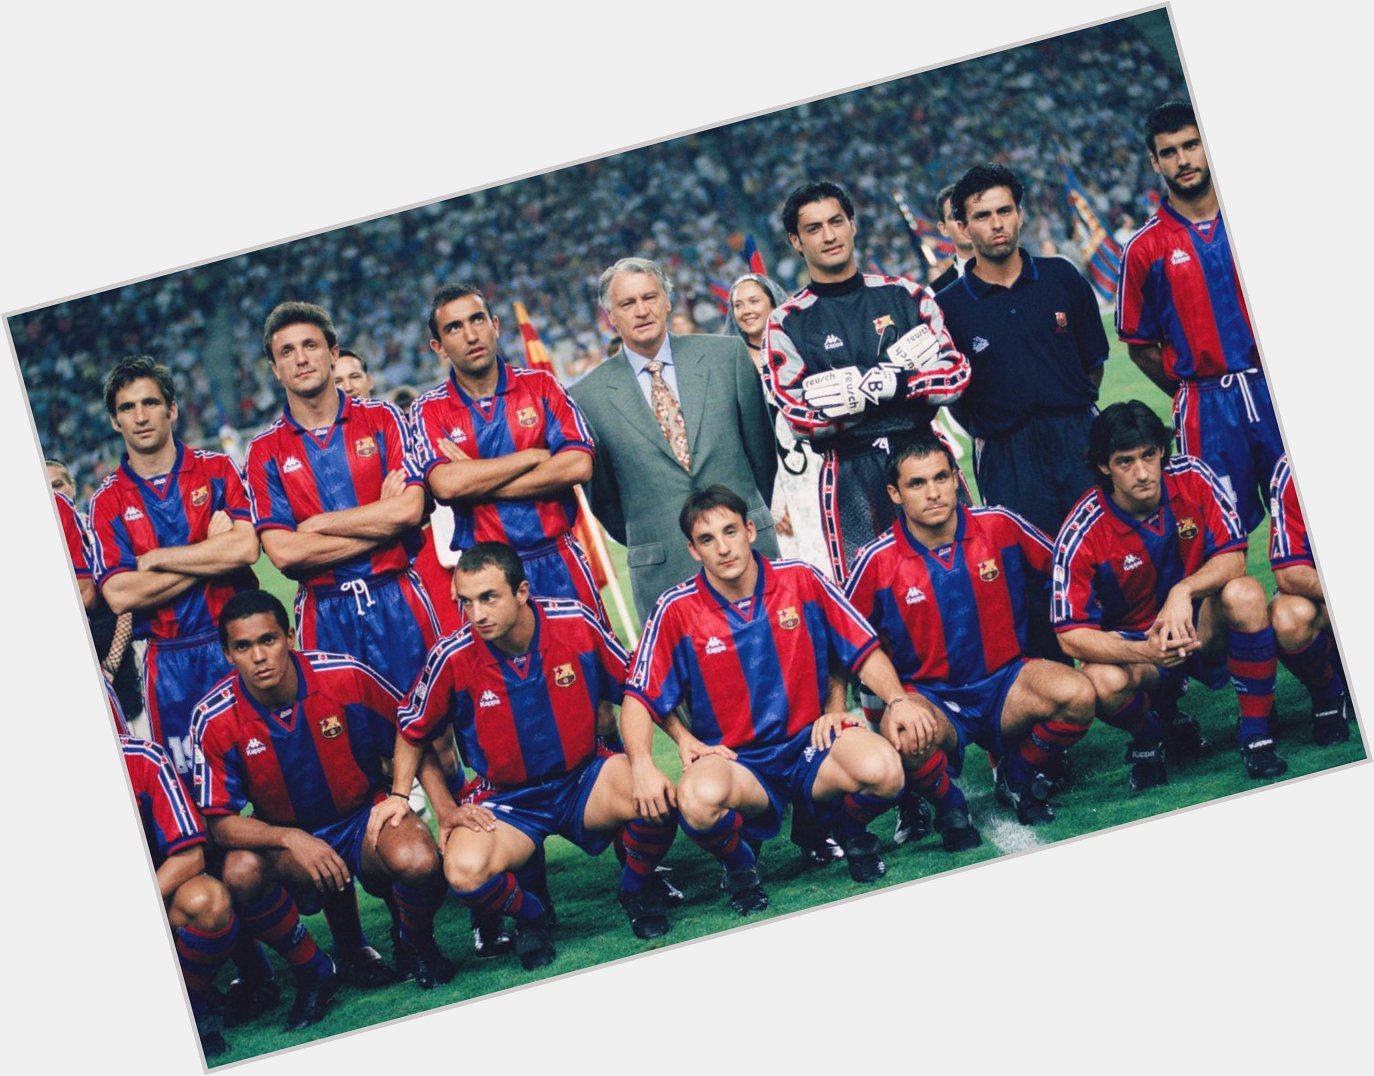 Happy birthday, Jose Mourinho! Here he is posing next to Pep Guardiola at the Nou Camp in August, 1996. 